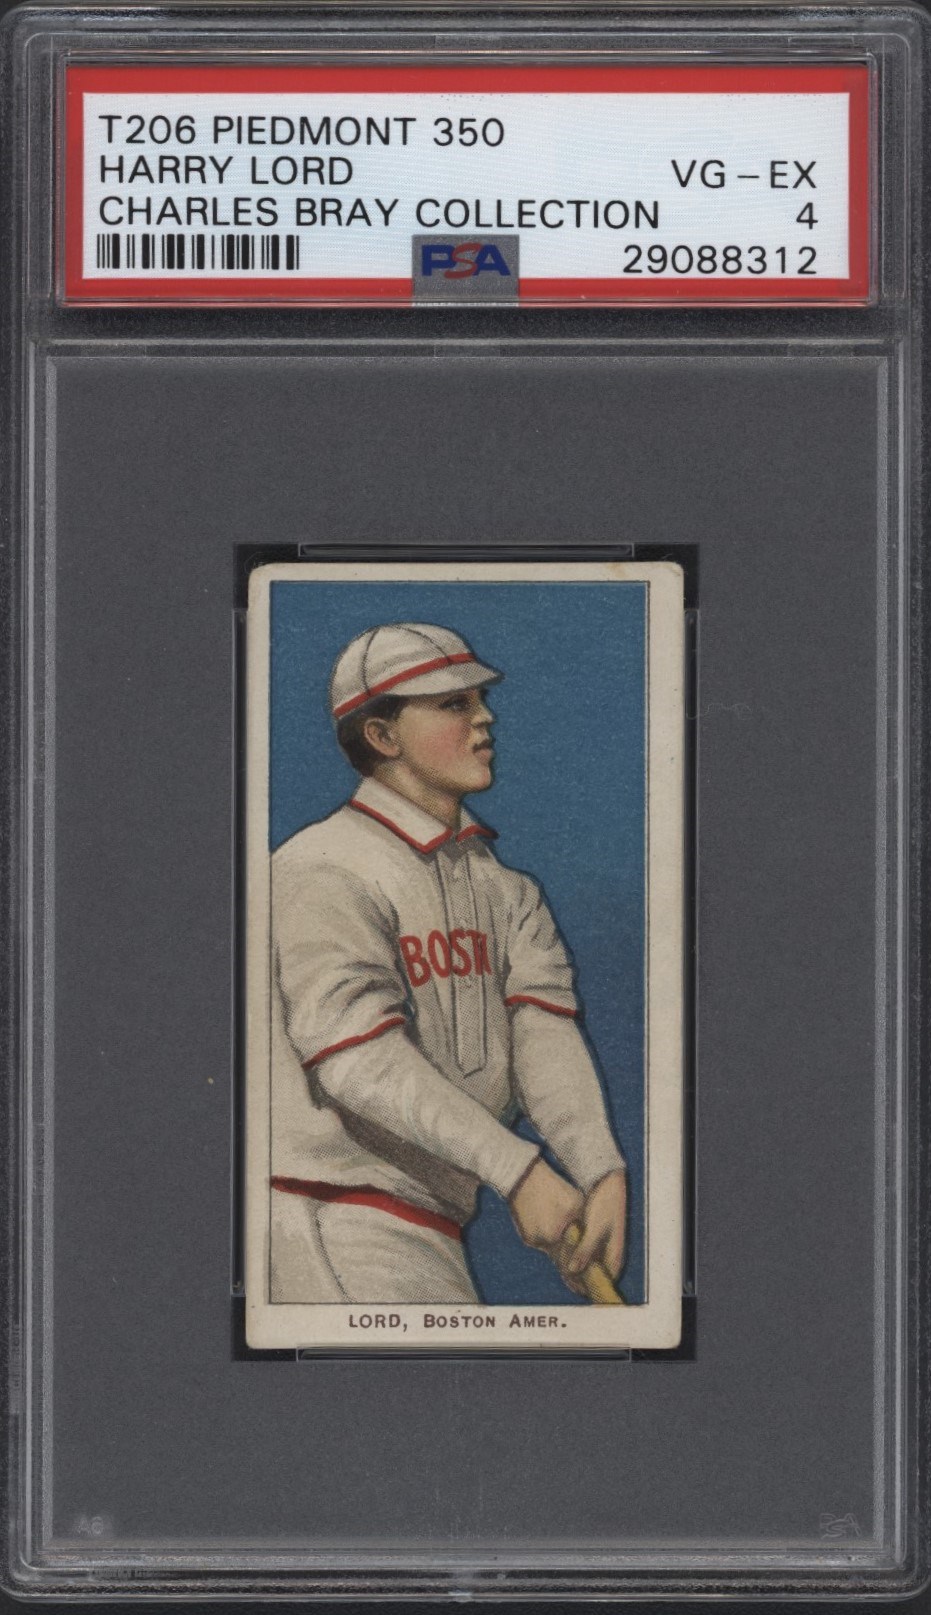 Baseball and Trading Cards - T206 Piedmont 350 Harry Lord PSA 4 From the Charles Bray Collection